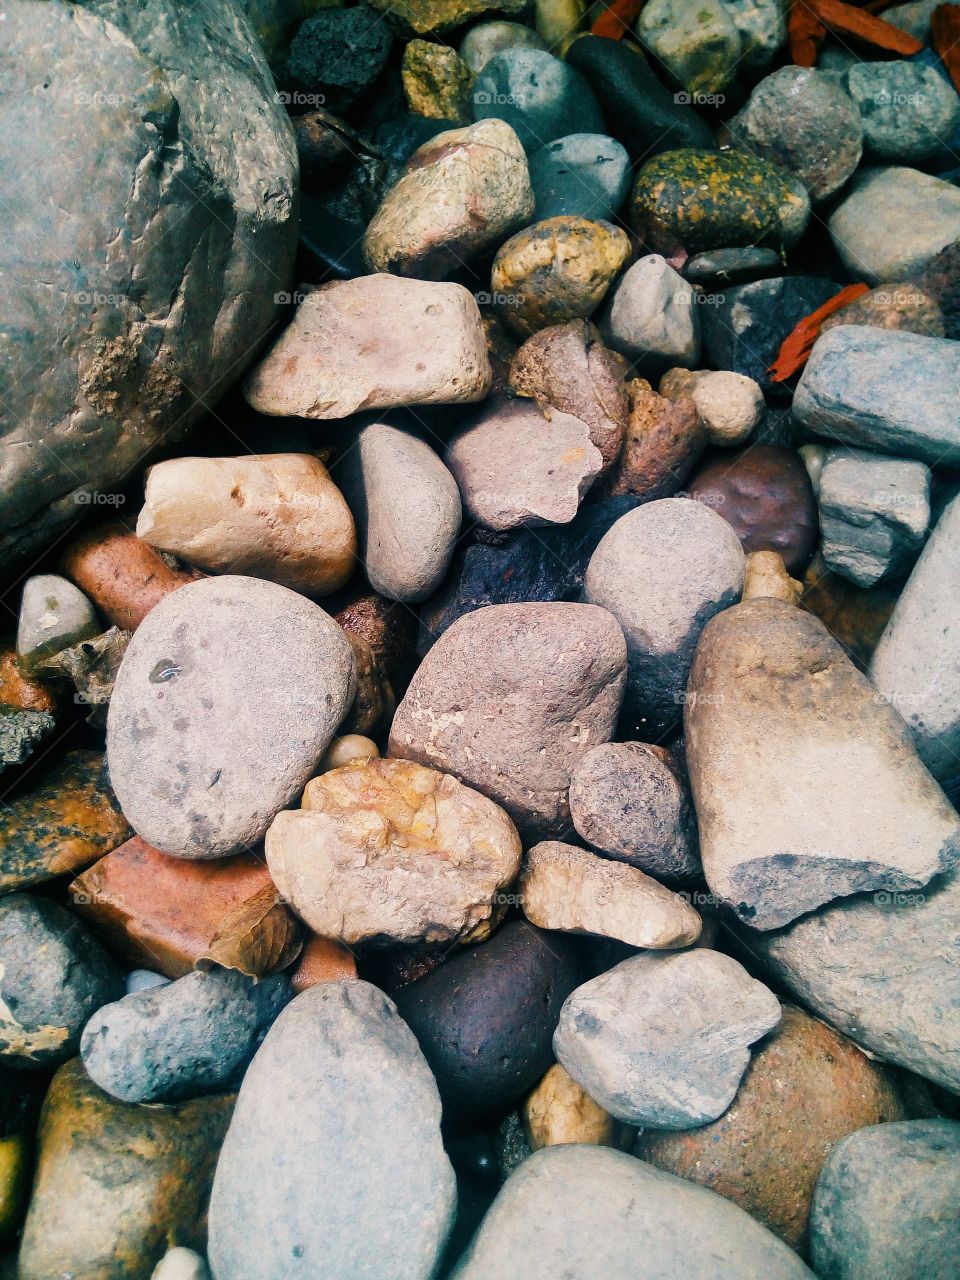 Beautiful Rocks of nature, Scattered around as the rain falls onto them.